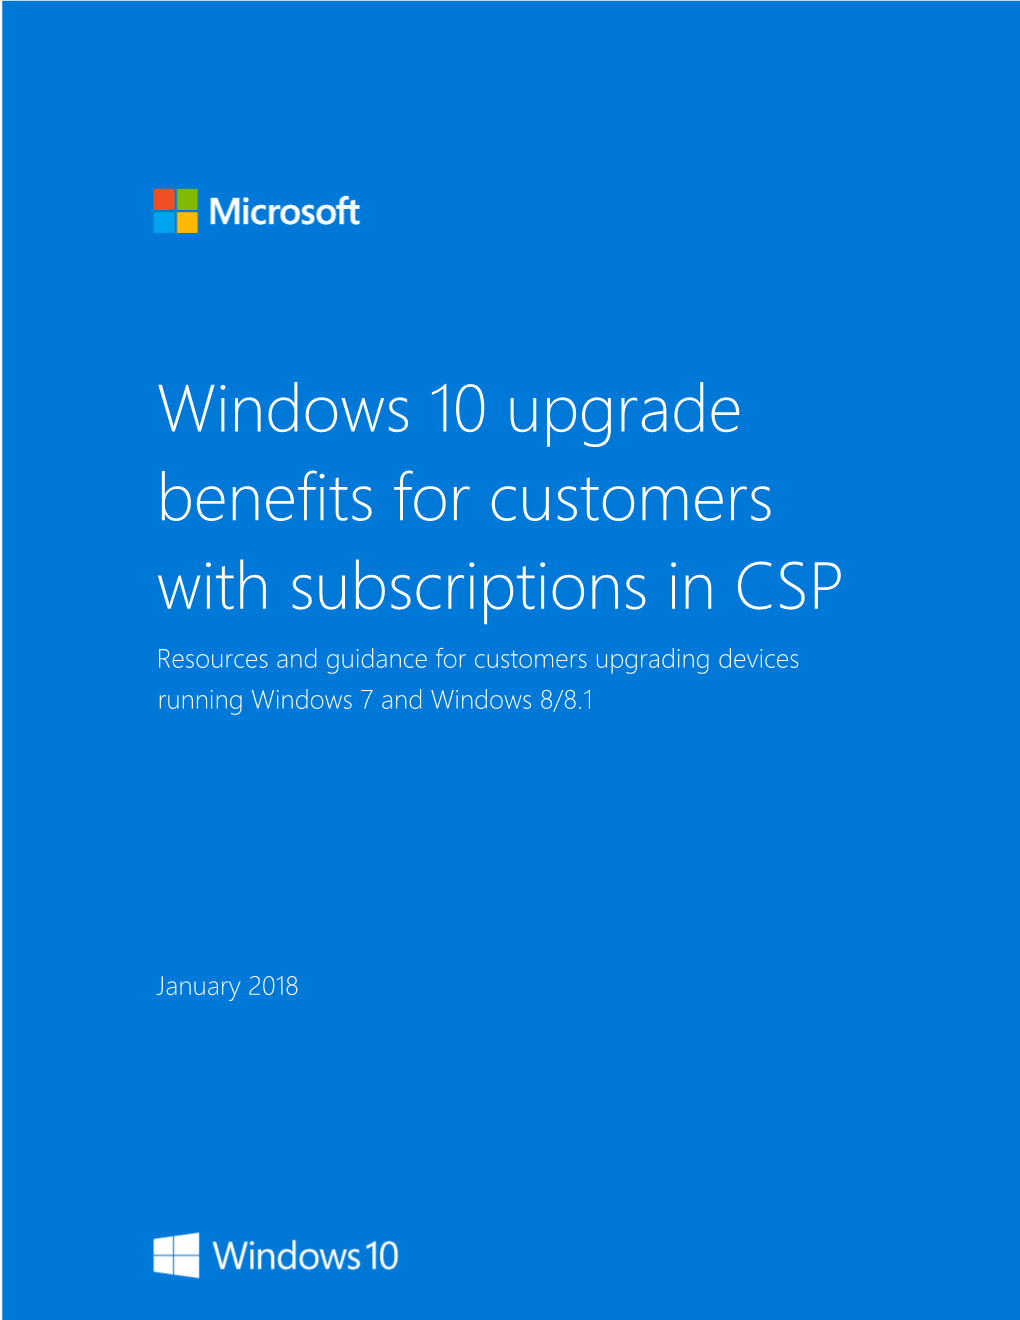 Windows 10 Upgrade Benefits for Customers with CSP